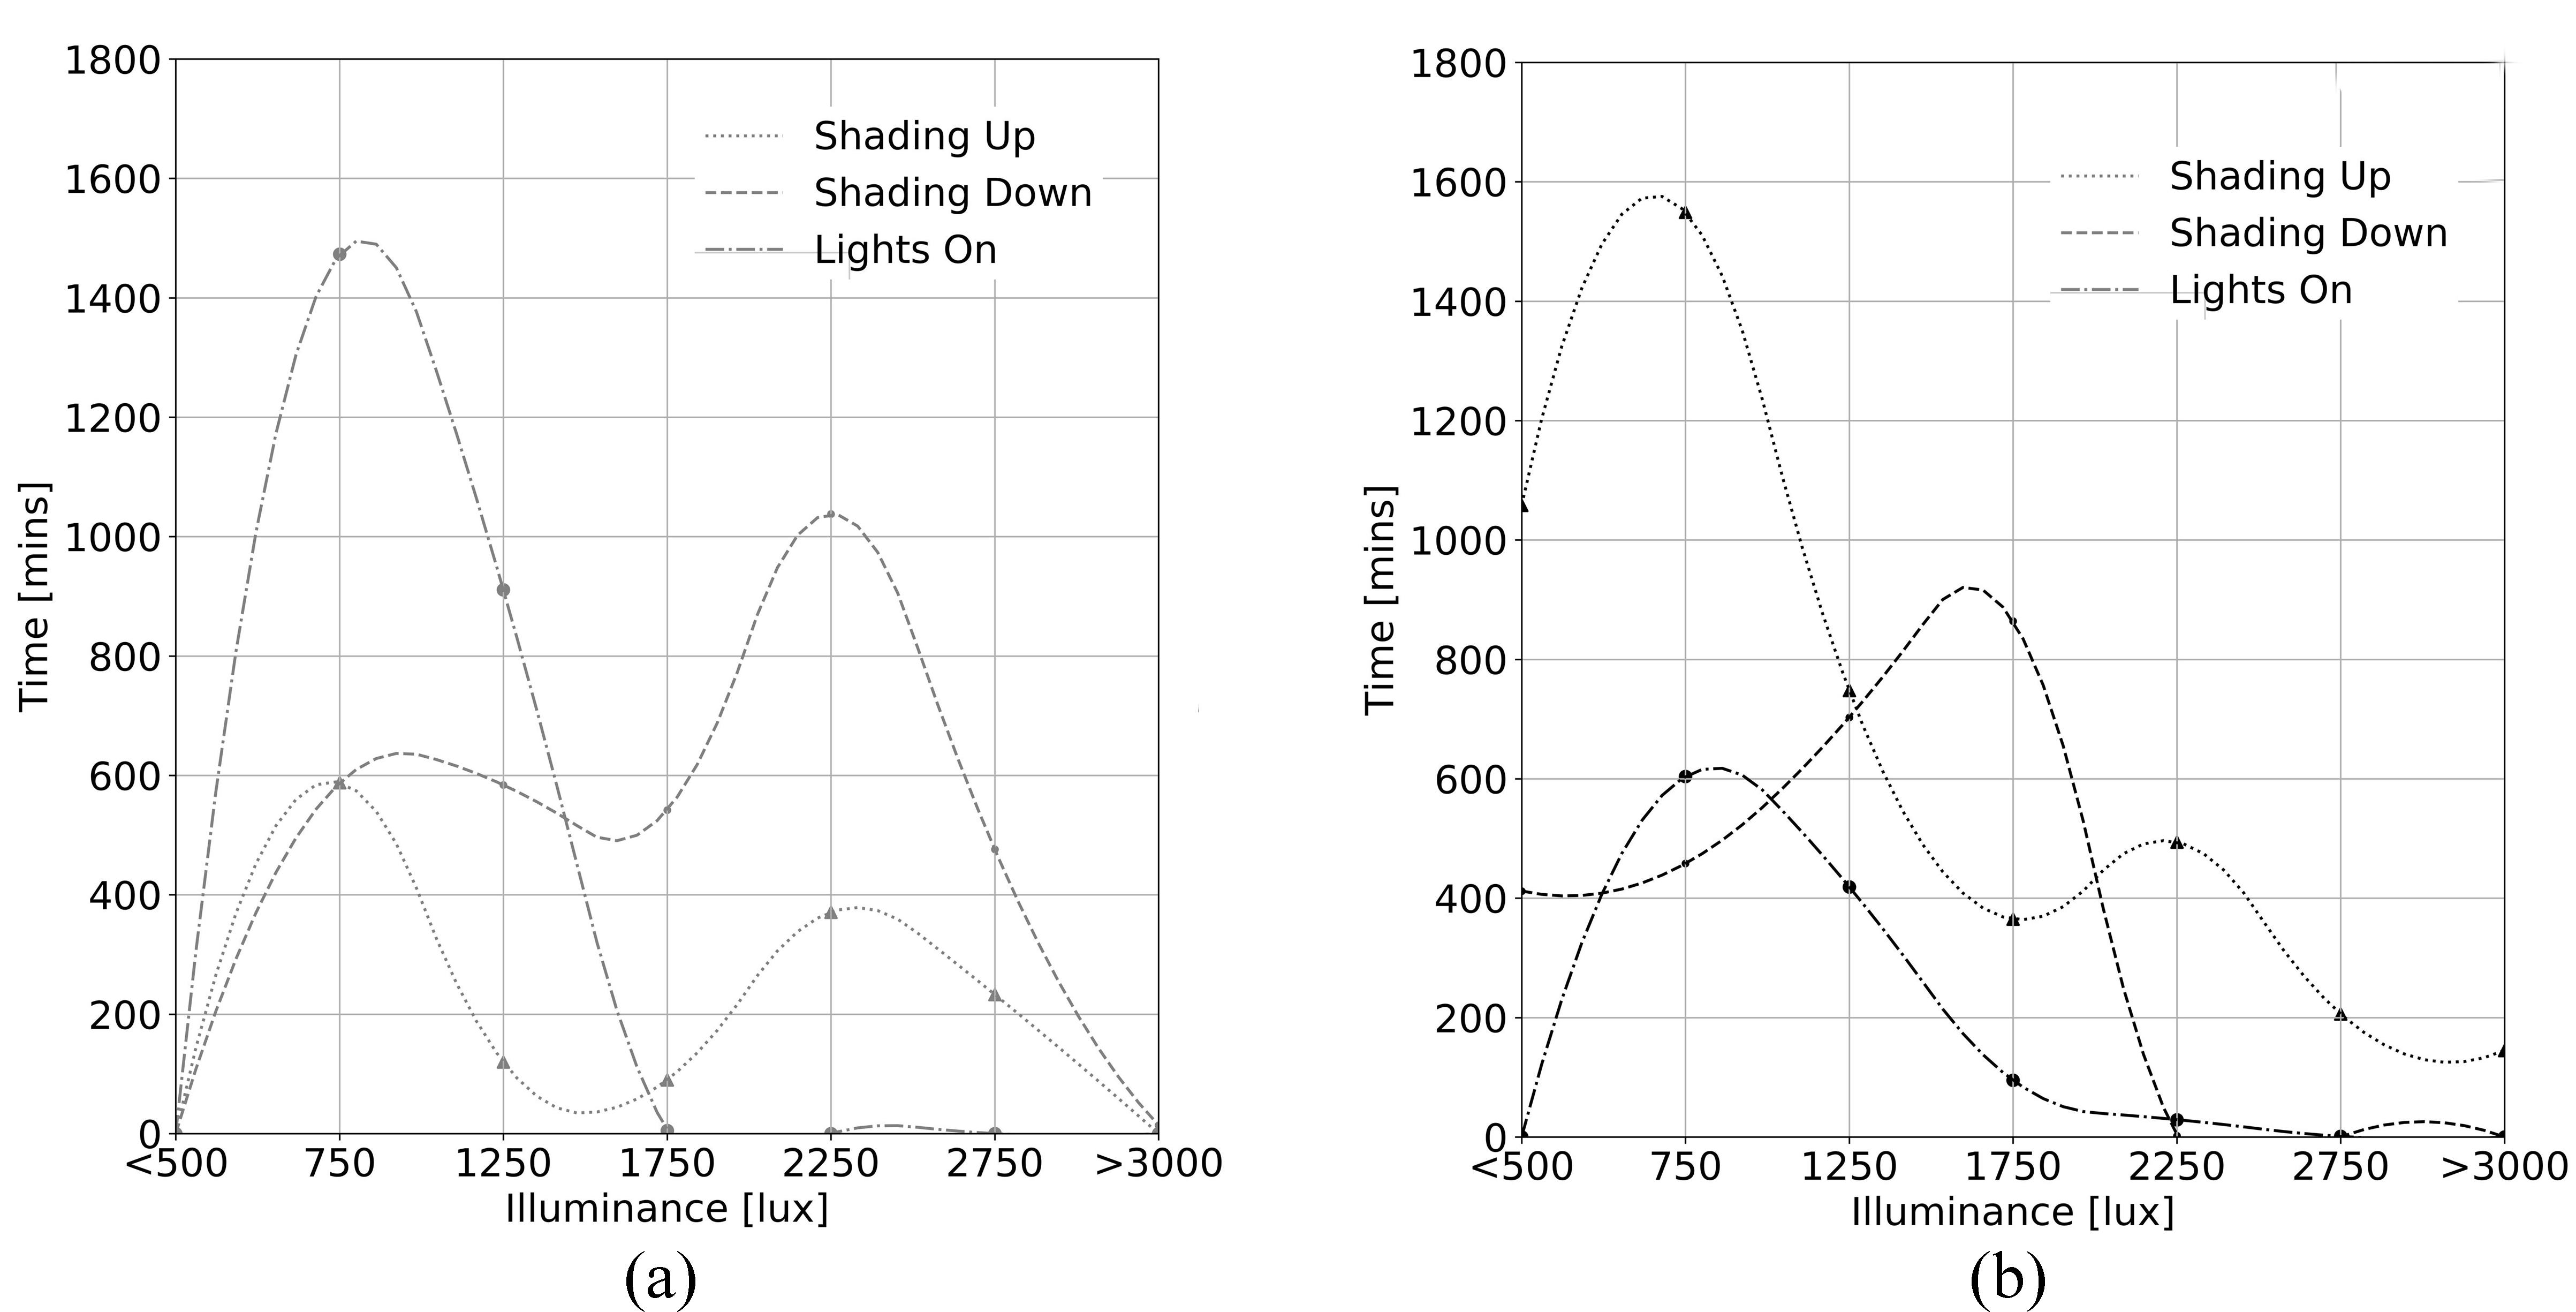 Use of blind and ceiling lights per step of illuminance: (a) Cell A and (b) cell B.